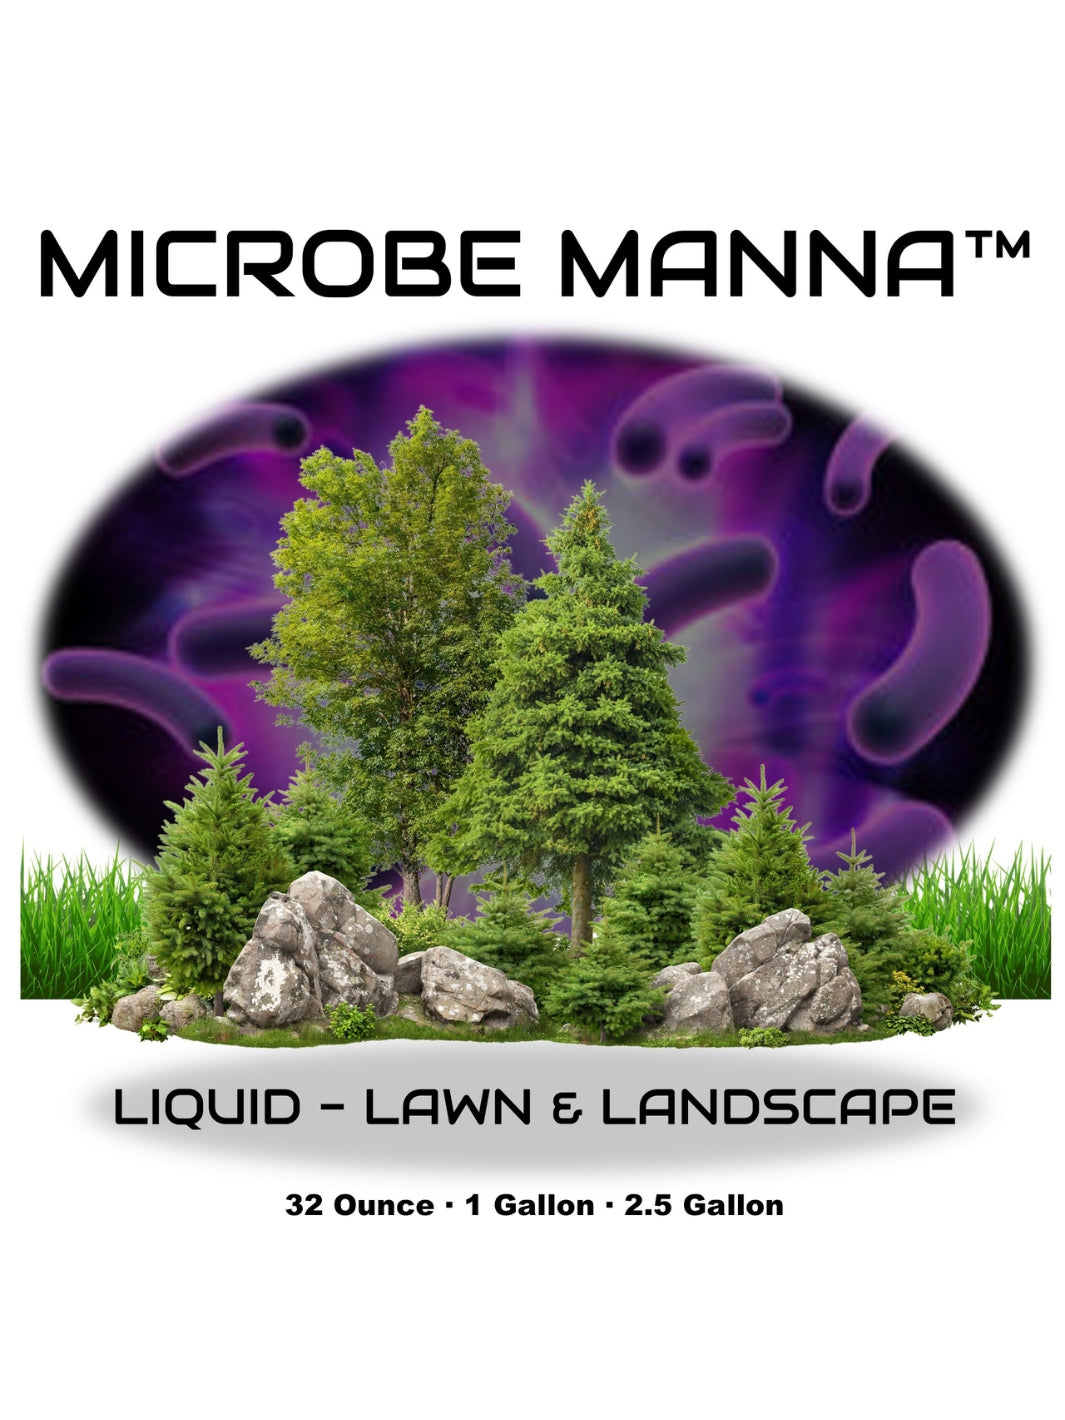 Microbe Manna Liquid Lawn and Landscape exclusively from Rocky Mountain BioAg® is super food for soil microbes in Biological...Beyond Organic® growing practices | RMBA